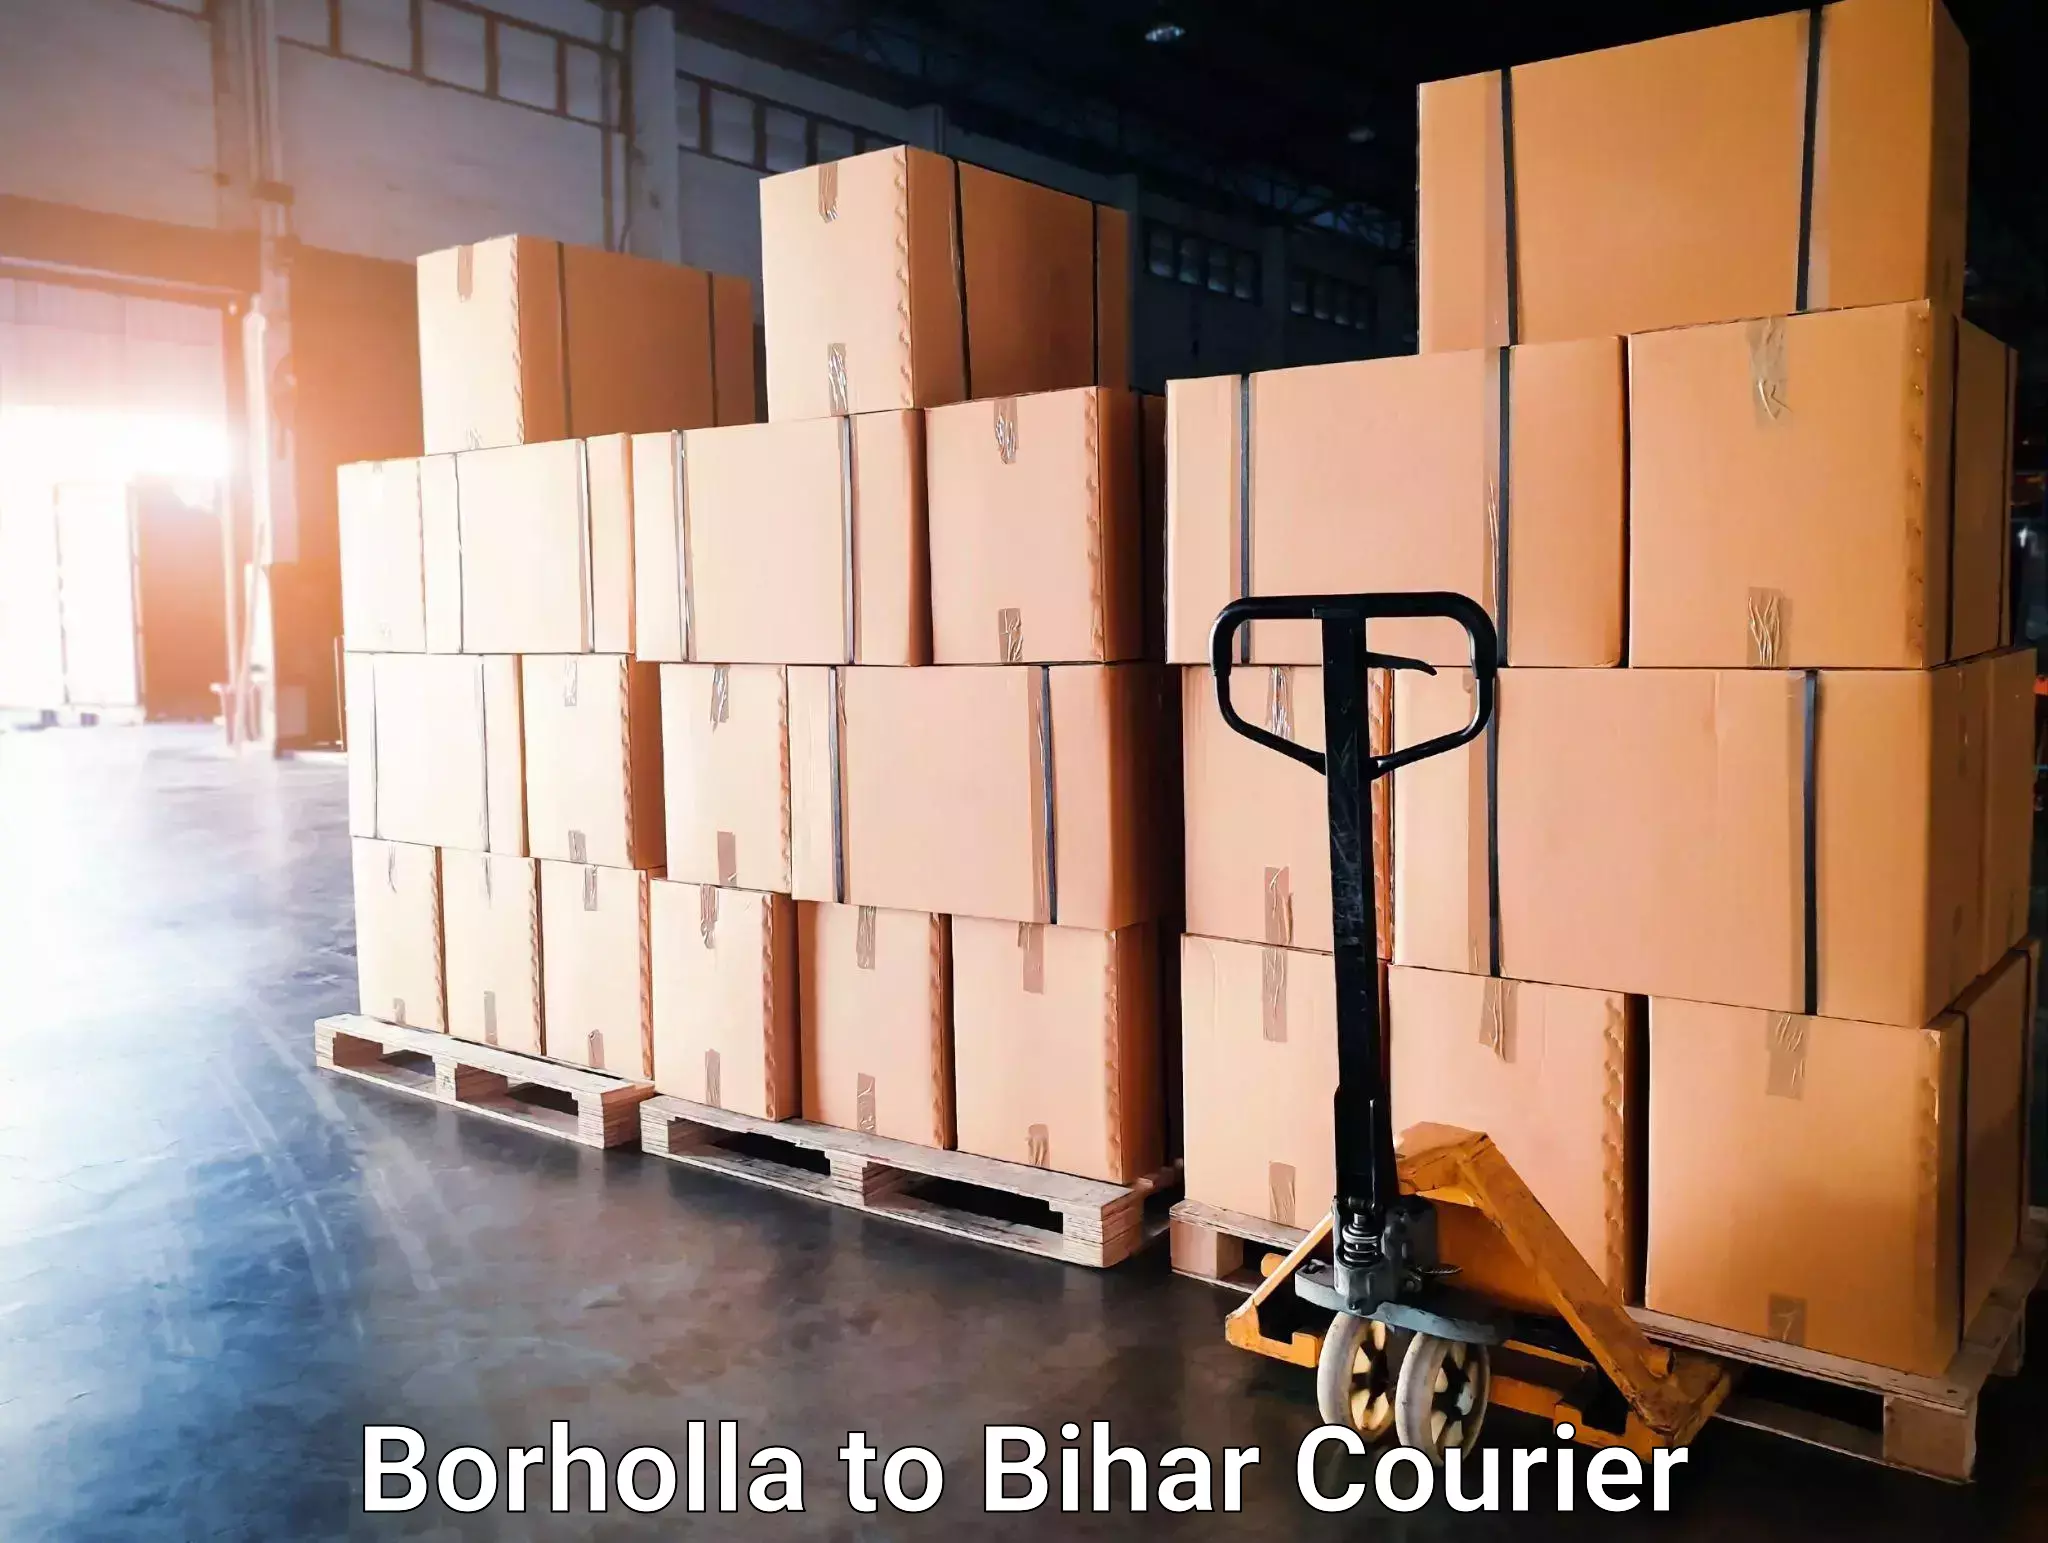 Courier service efficiency in Borholla to Darbhanga